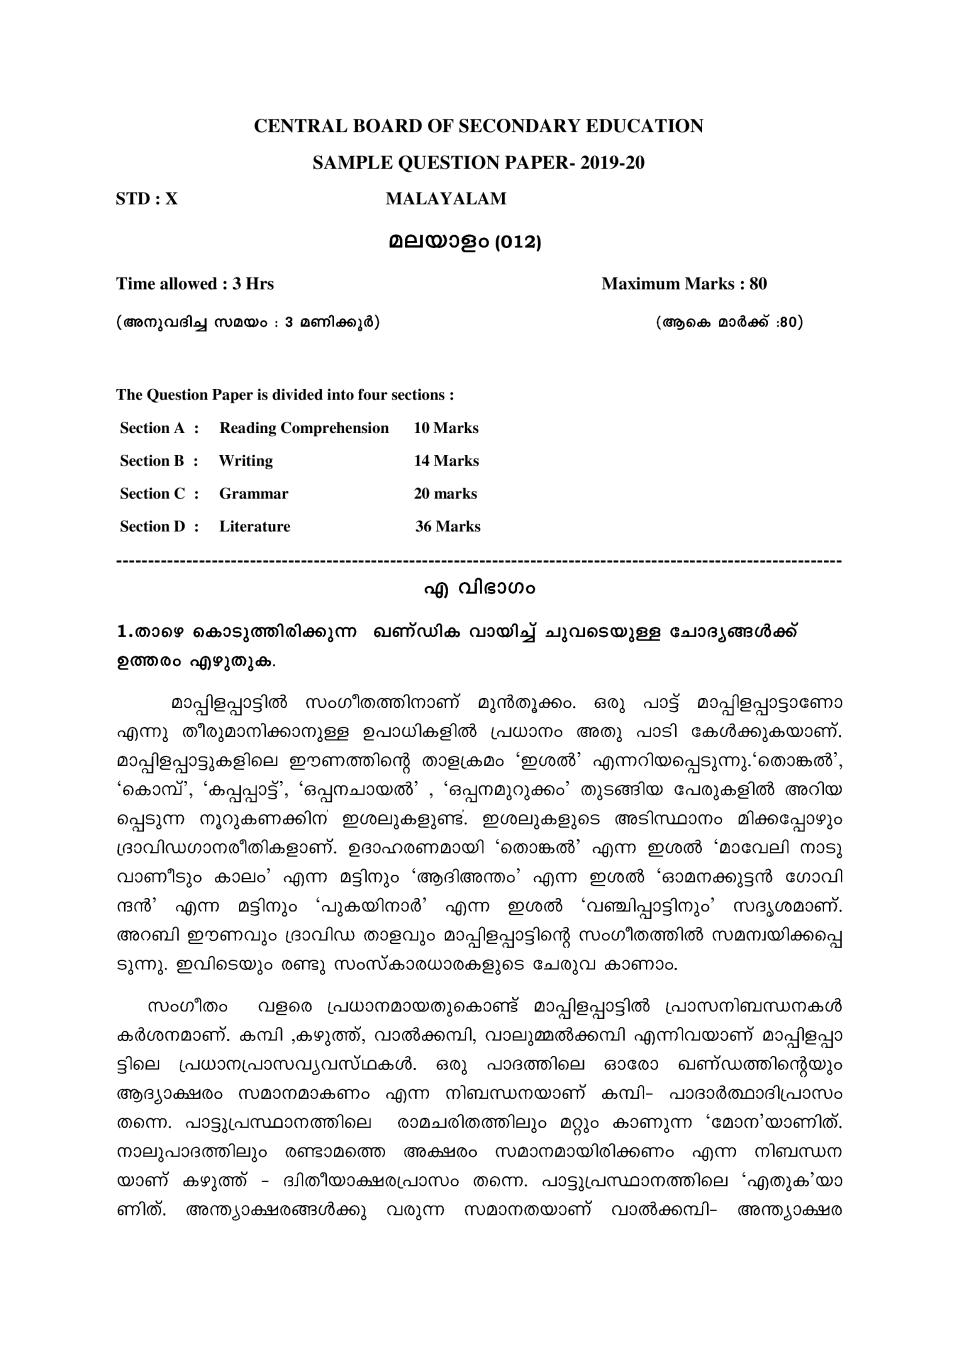 CBSE Class 10 Sample Paper 2020 for Malayalam - Page 1